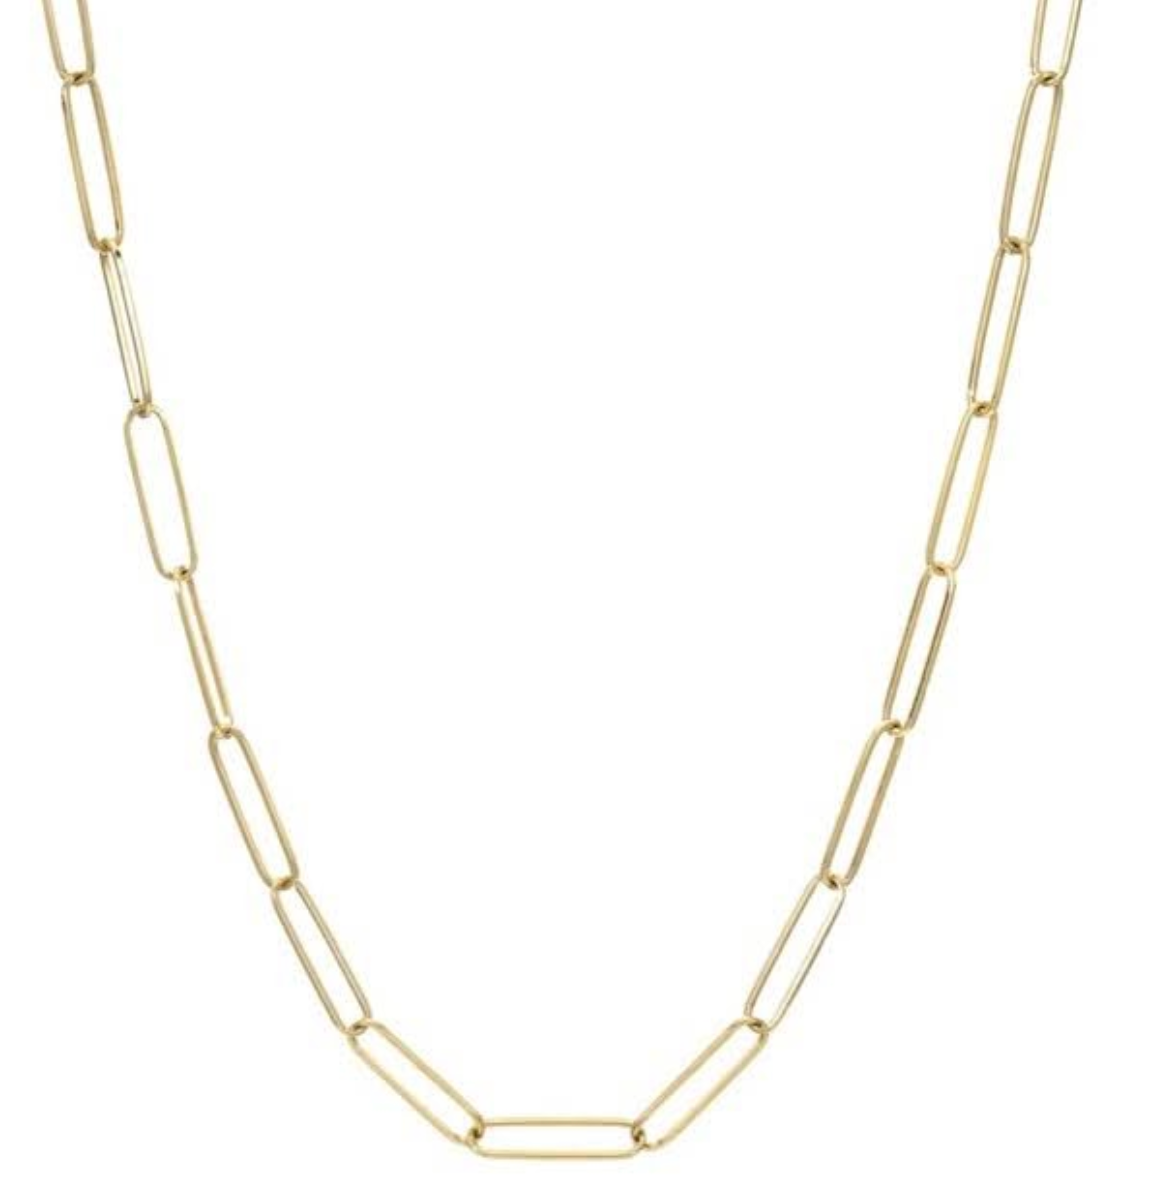 Chain Link Necklace - 16"